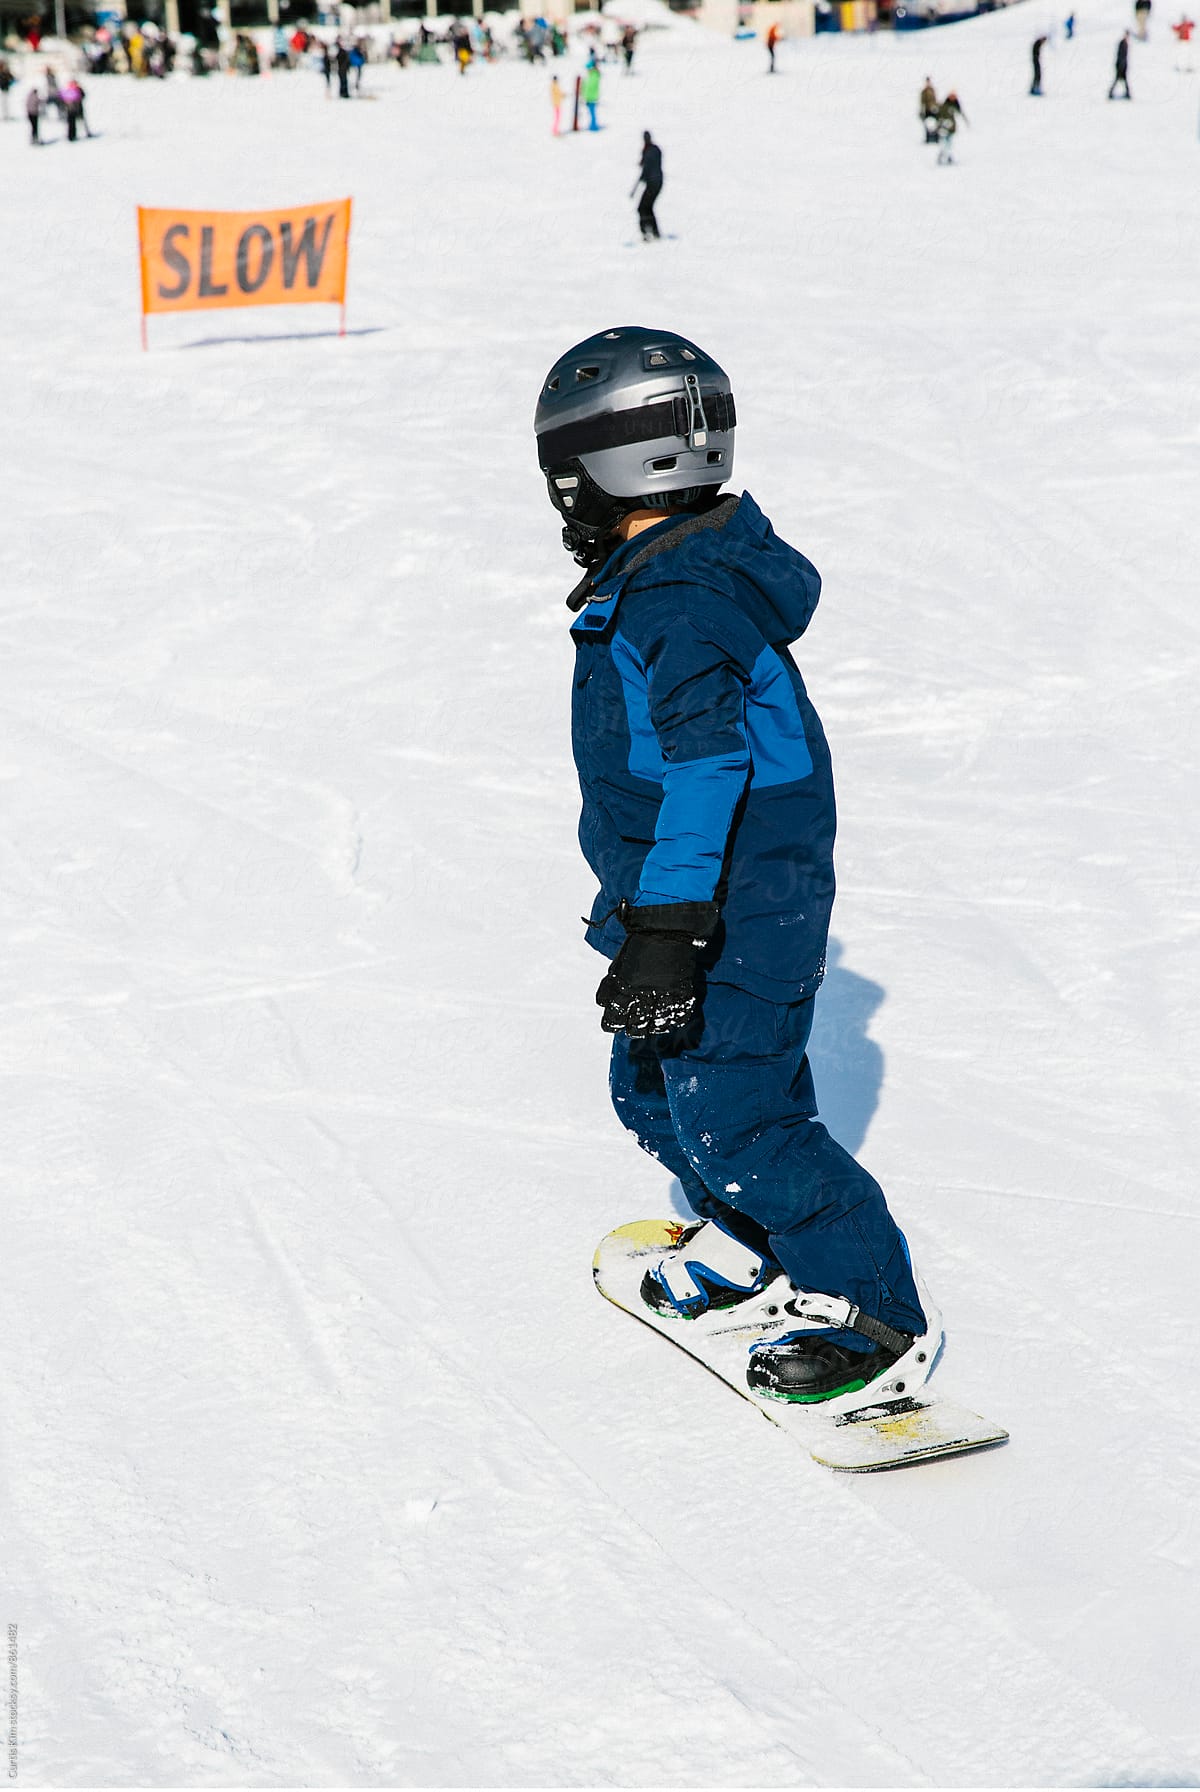 Young boy snowboarding down a hill